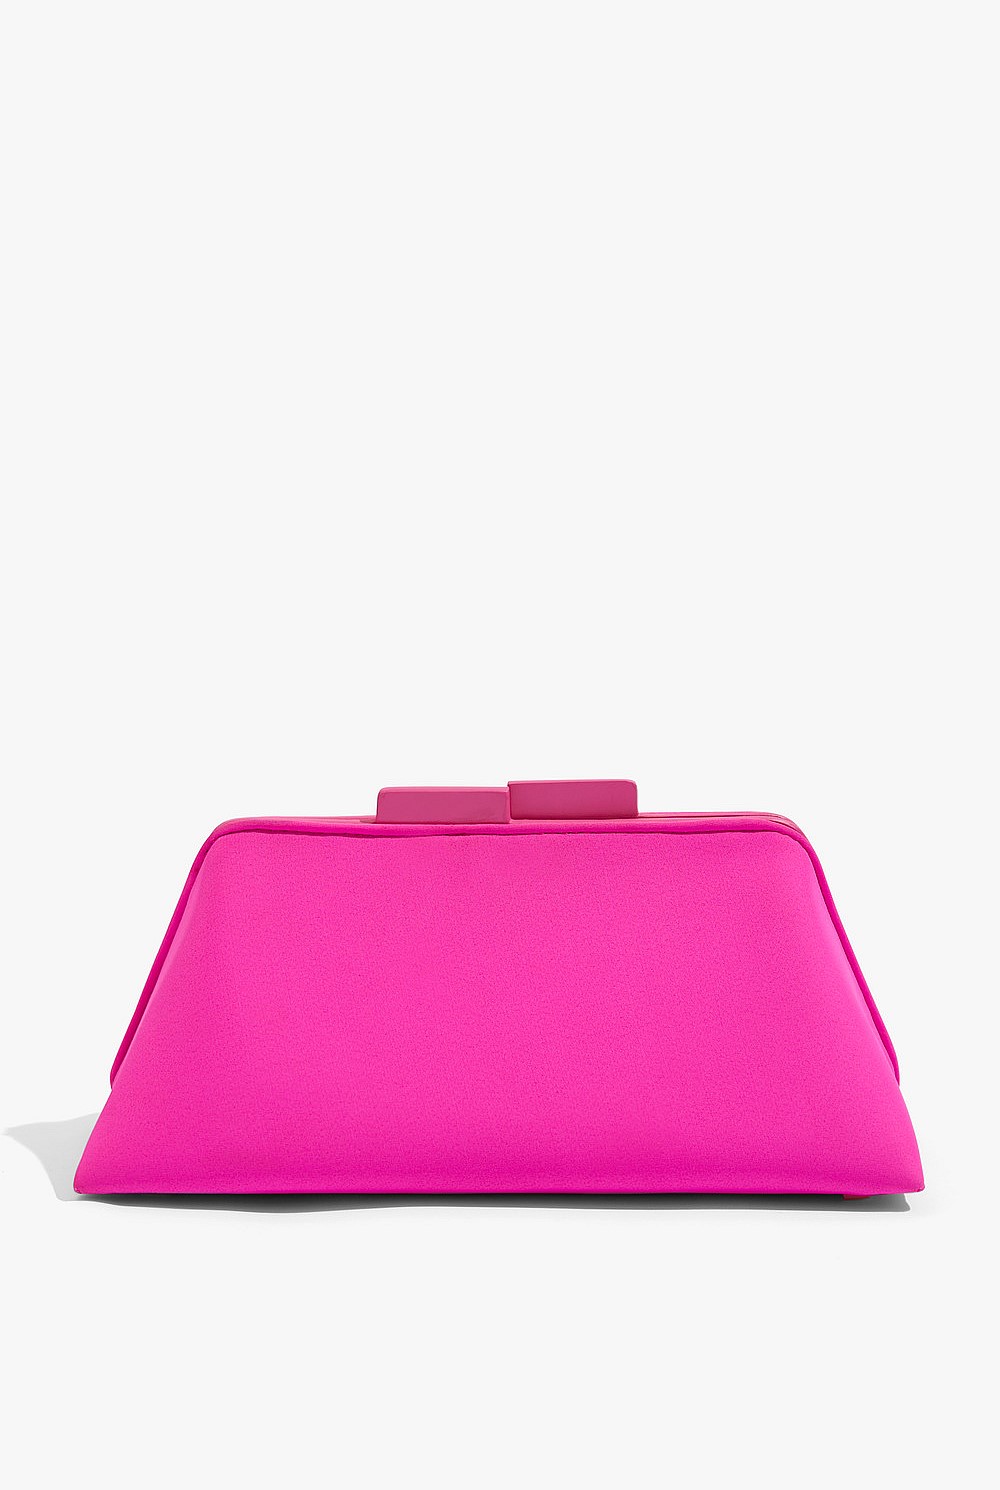 Vivid Pink Structured Clutch Bag - Bags | Outlet